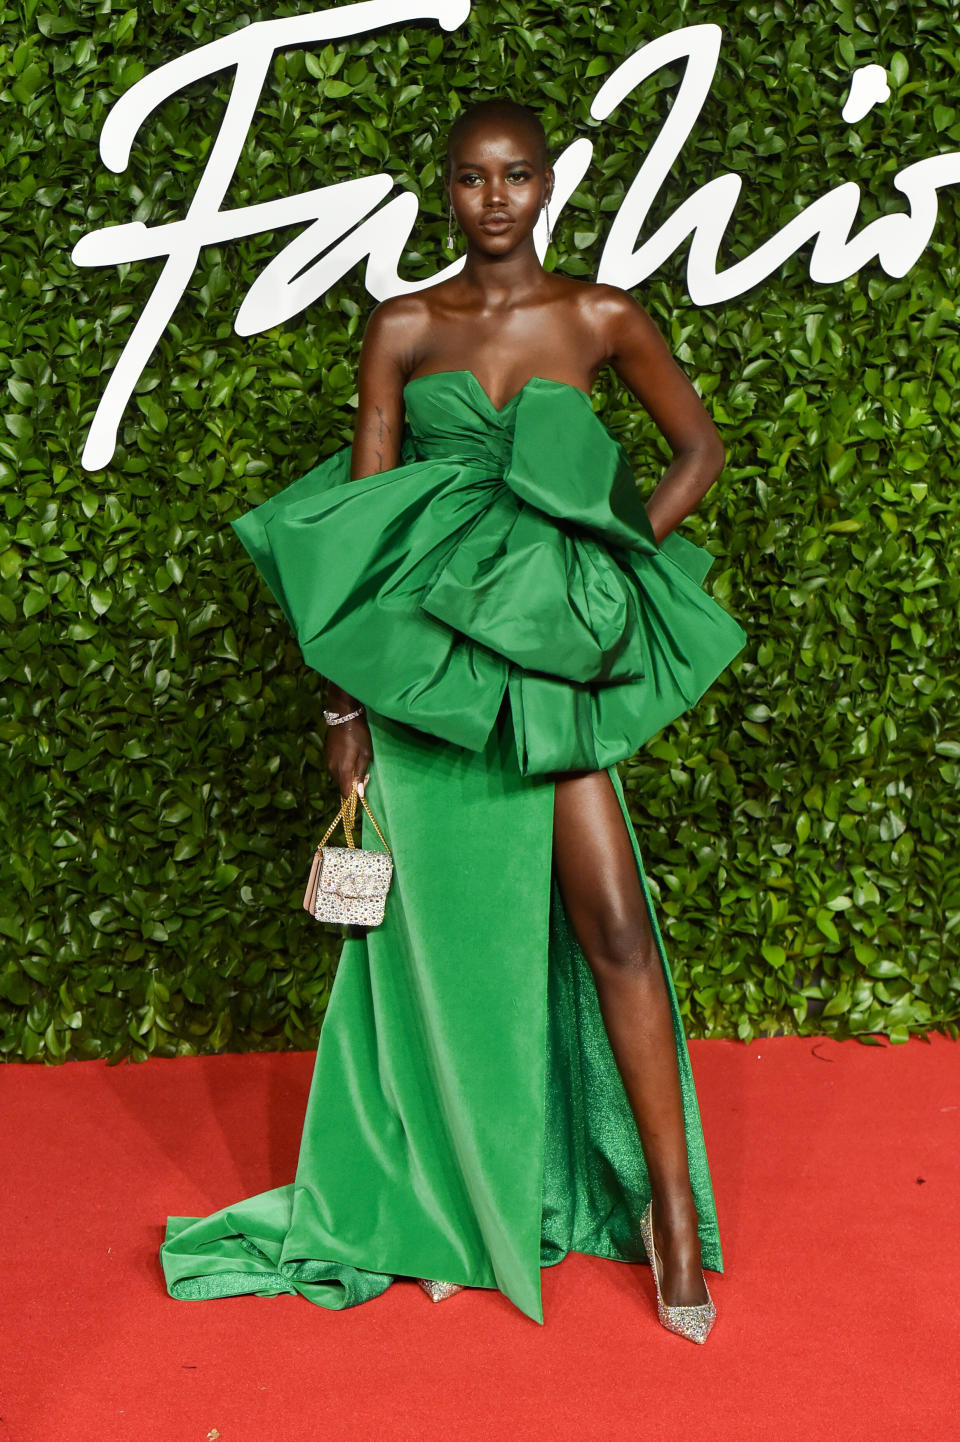 Adut Akech&nbsp;at the Fashion Awards in London on Dec. 2.